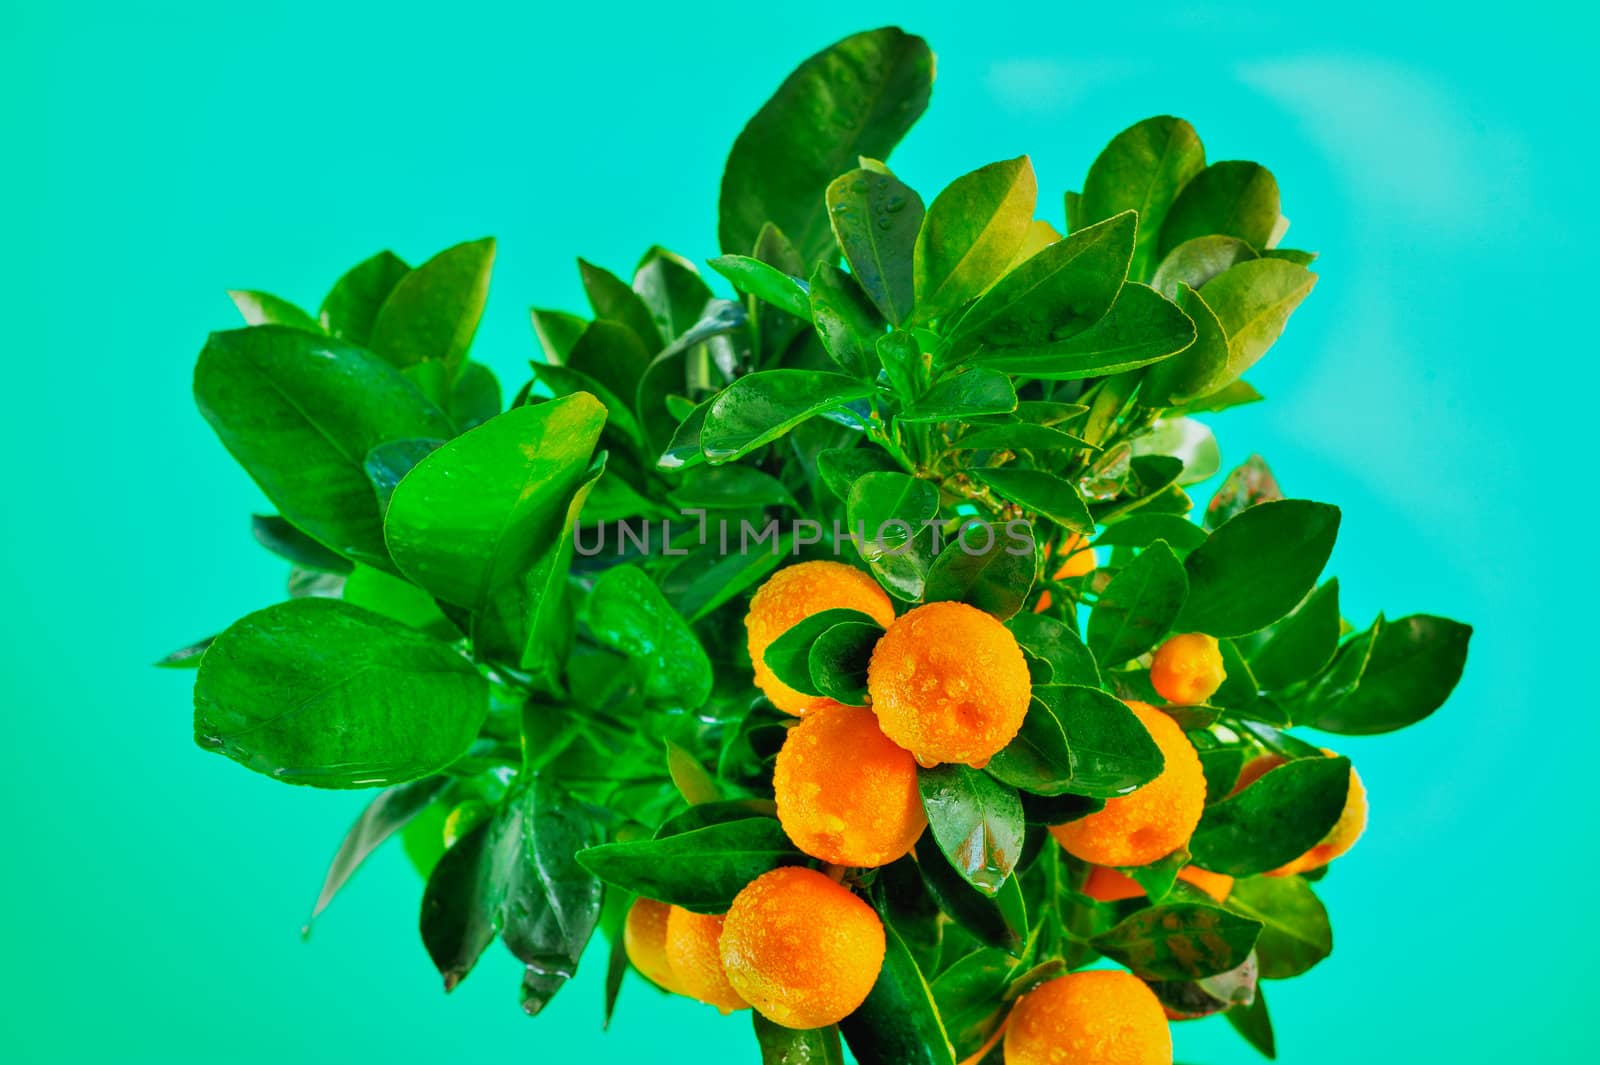 Oranges on the branches after the rain